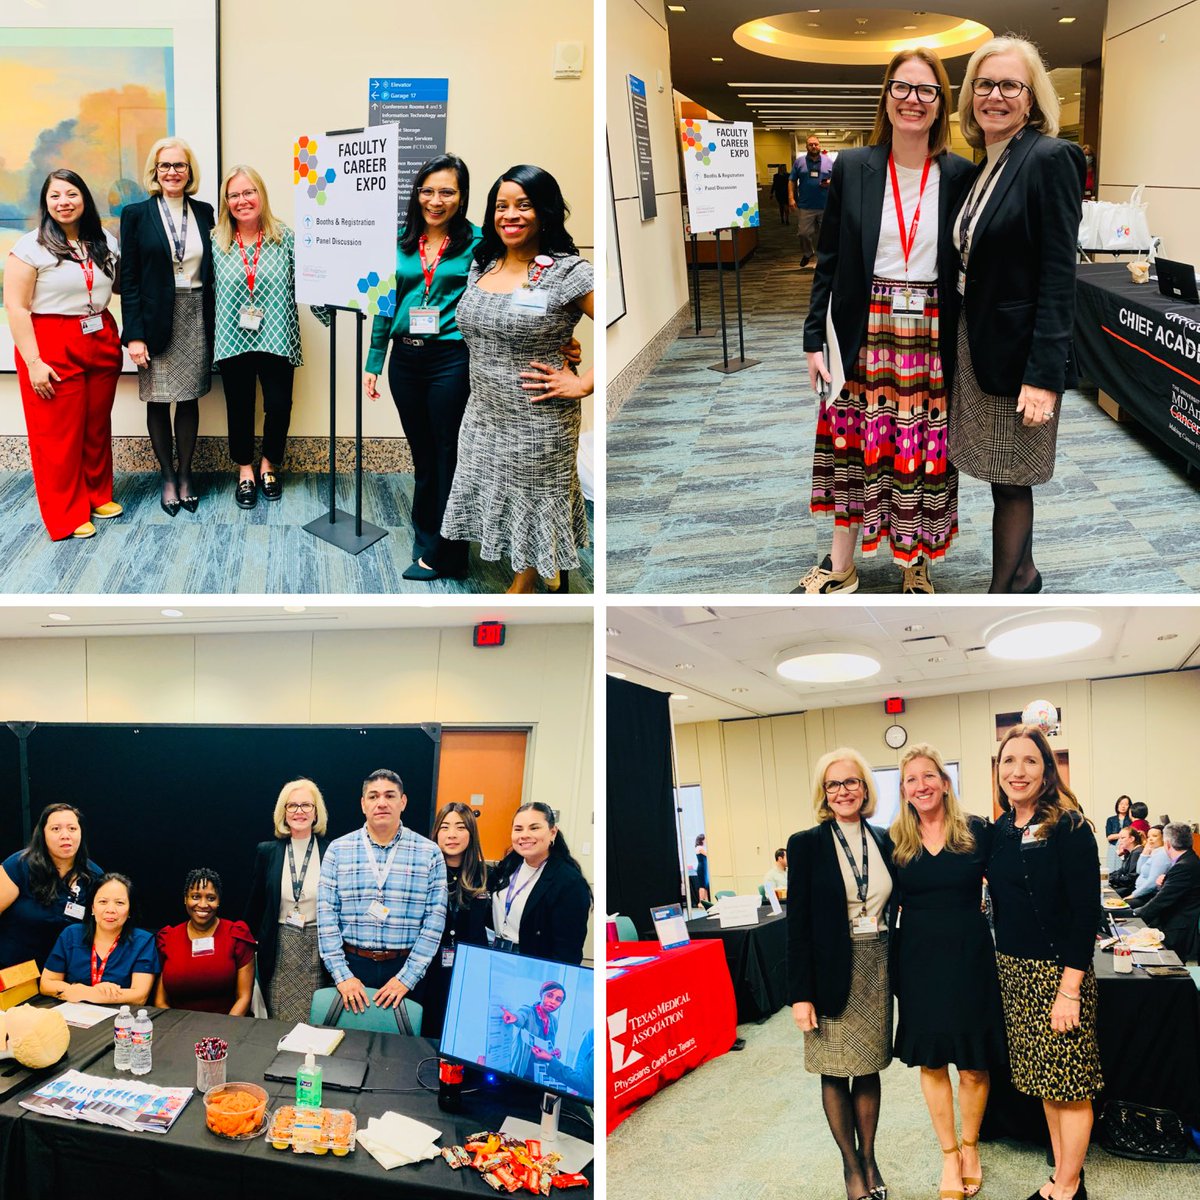 What an amazing ⁦@MDAndersonNews⁩ team at the Faculty Career Expo! We’re always learning and exploring how better to serve our faculty and trainees. Fantastic day for all involved. Many thanks to ⁦@AnneTsao2 ⁦@EGrubbsMD⁩ ⁦@CrystalCWMD⁩ and the entire team!